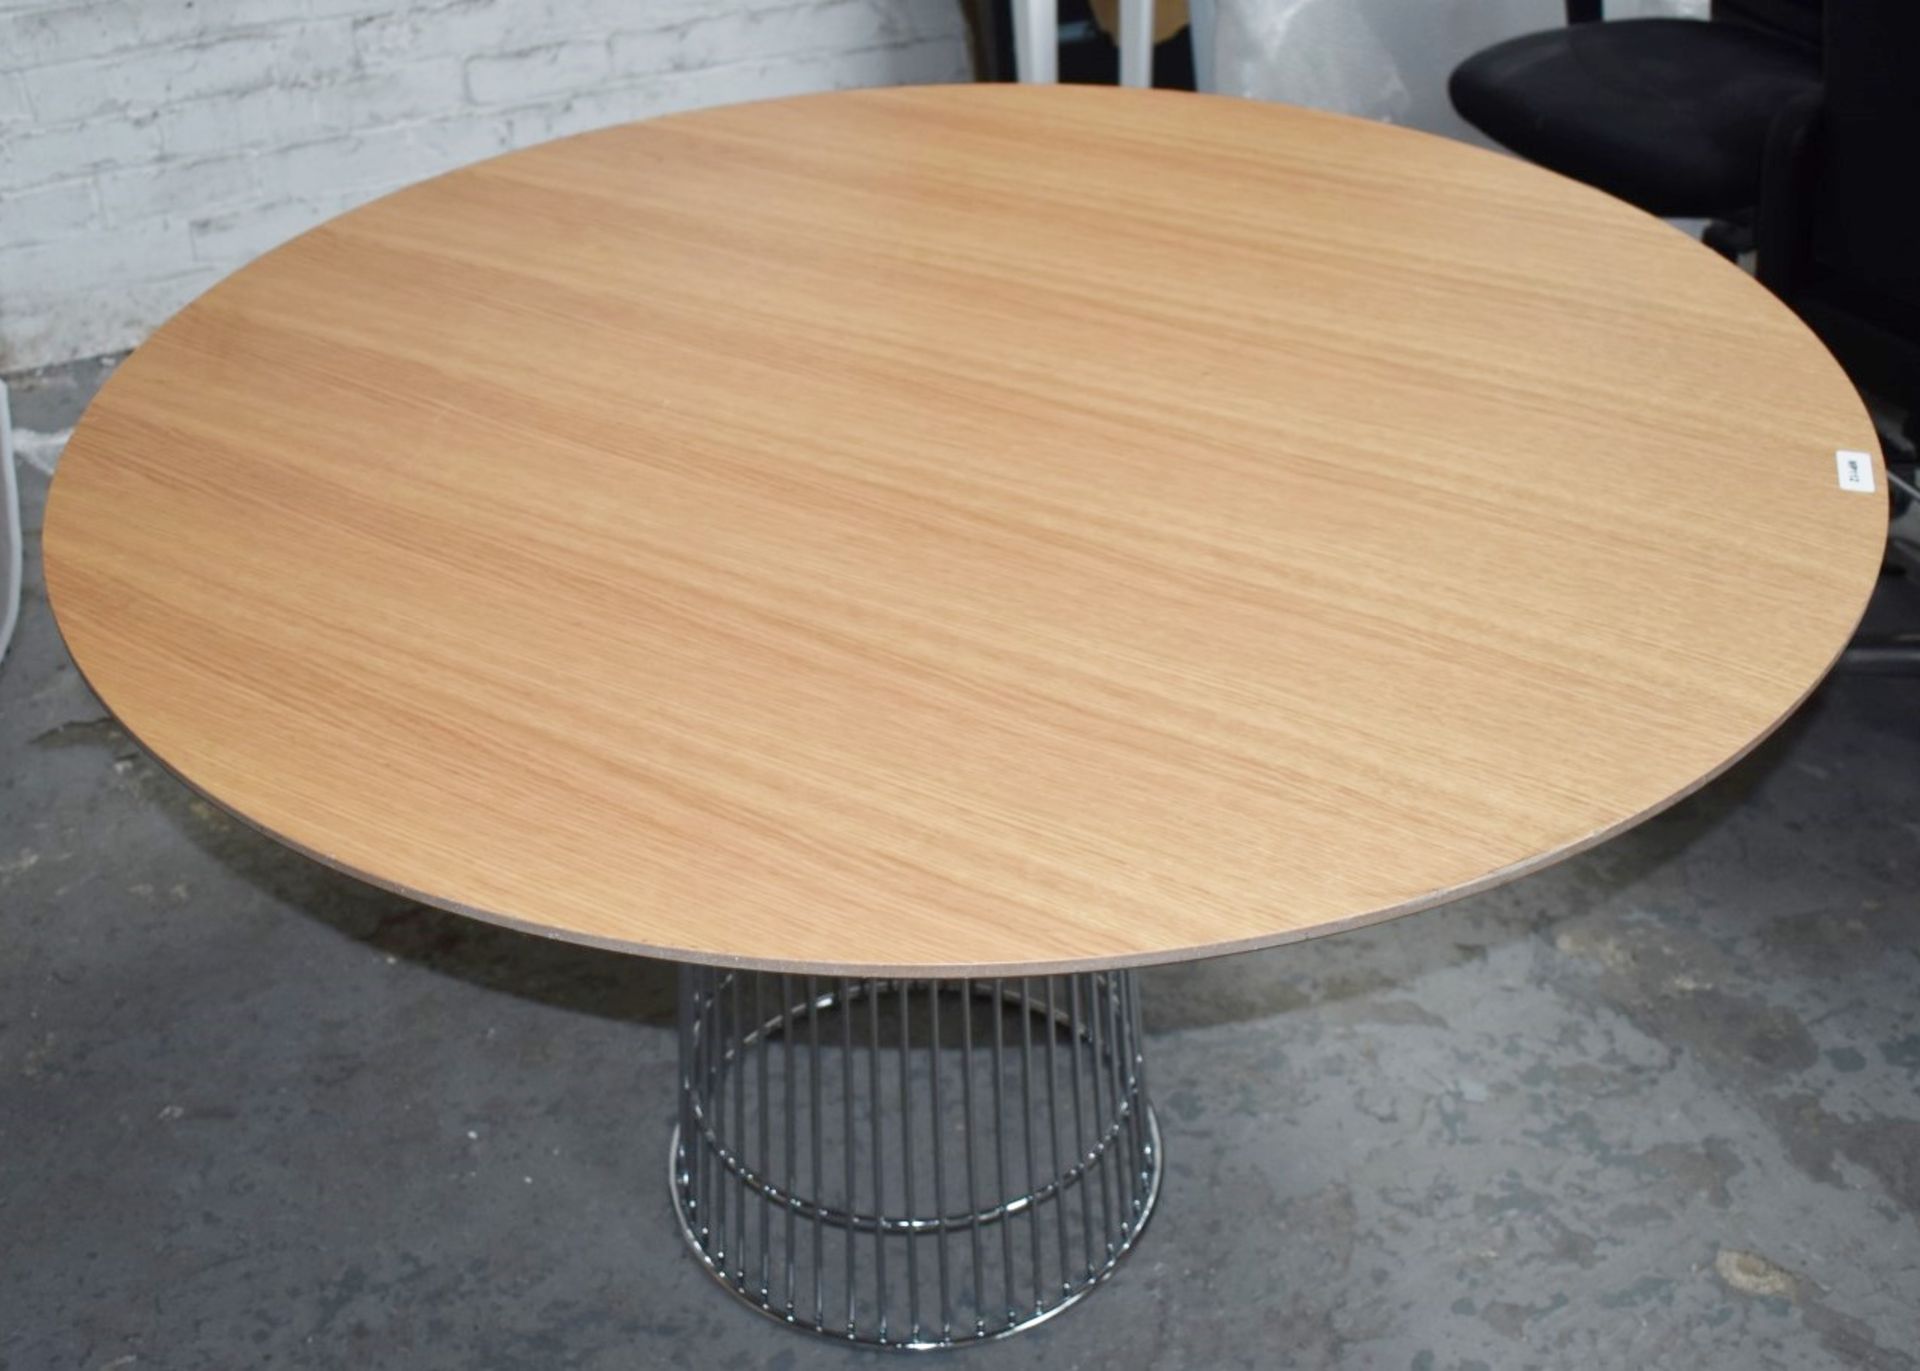 1 x Temahome Dining Table With a Large Round Table Top and Stylish Chrome Base - 150cm Diameter - Image 5 of 13